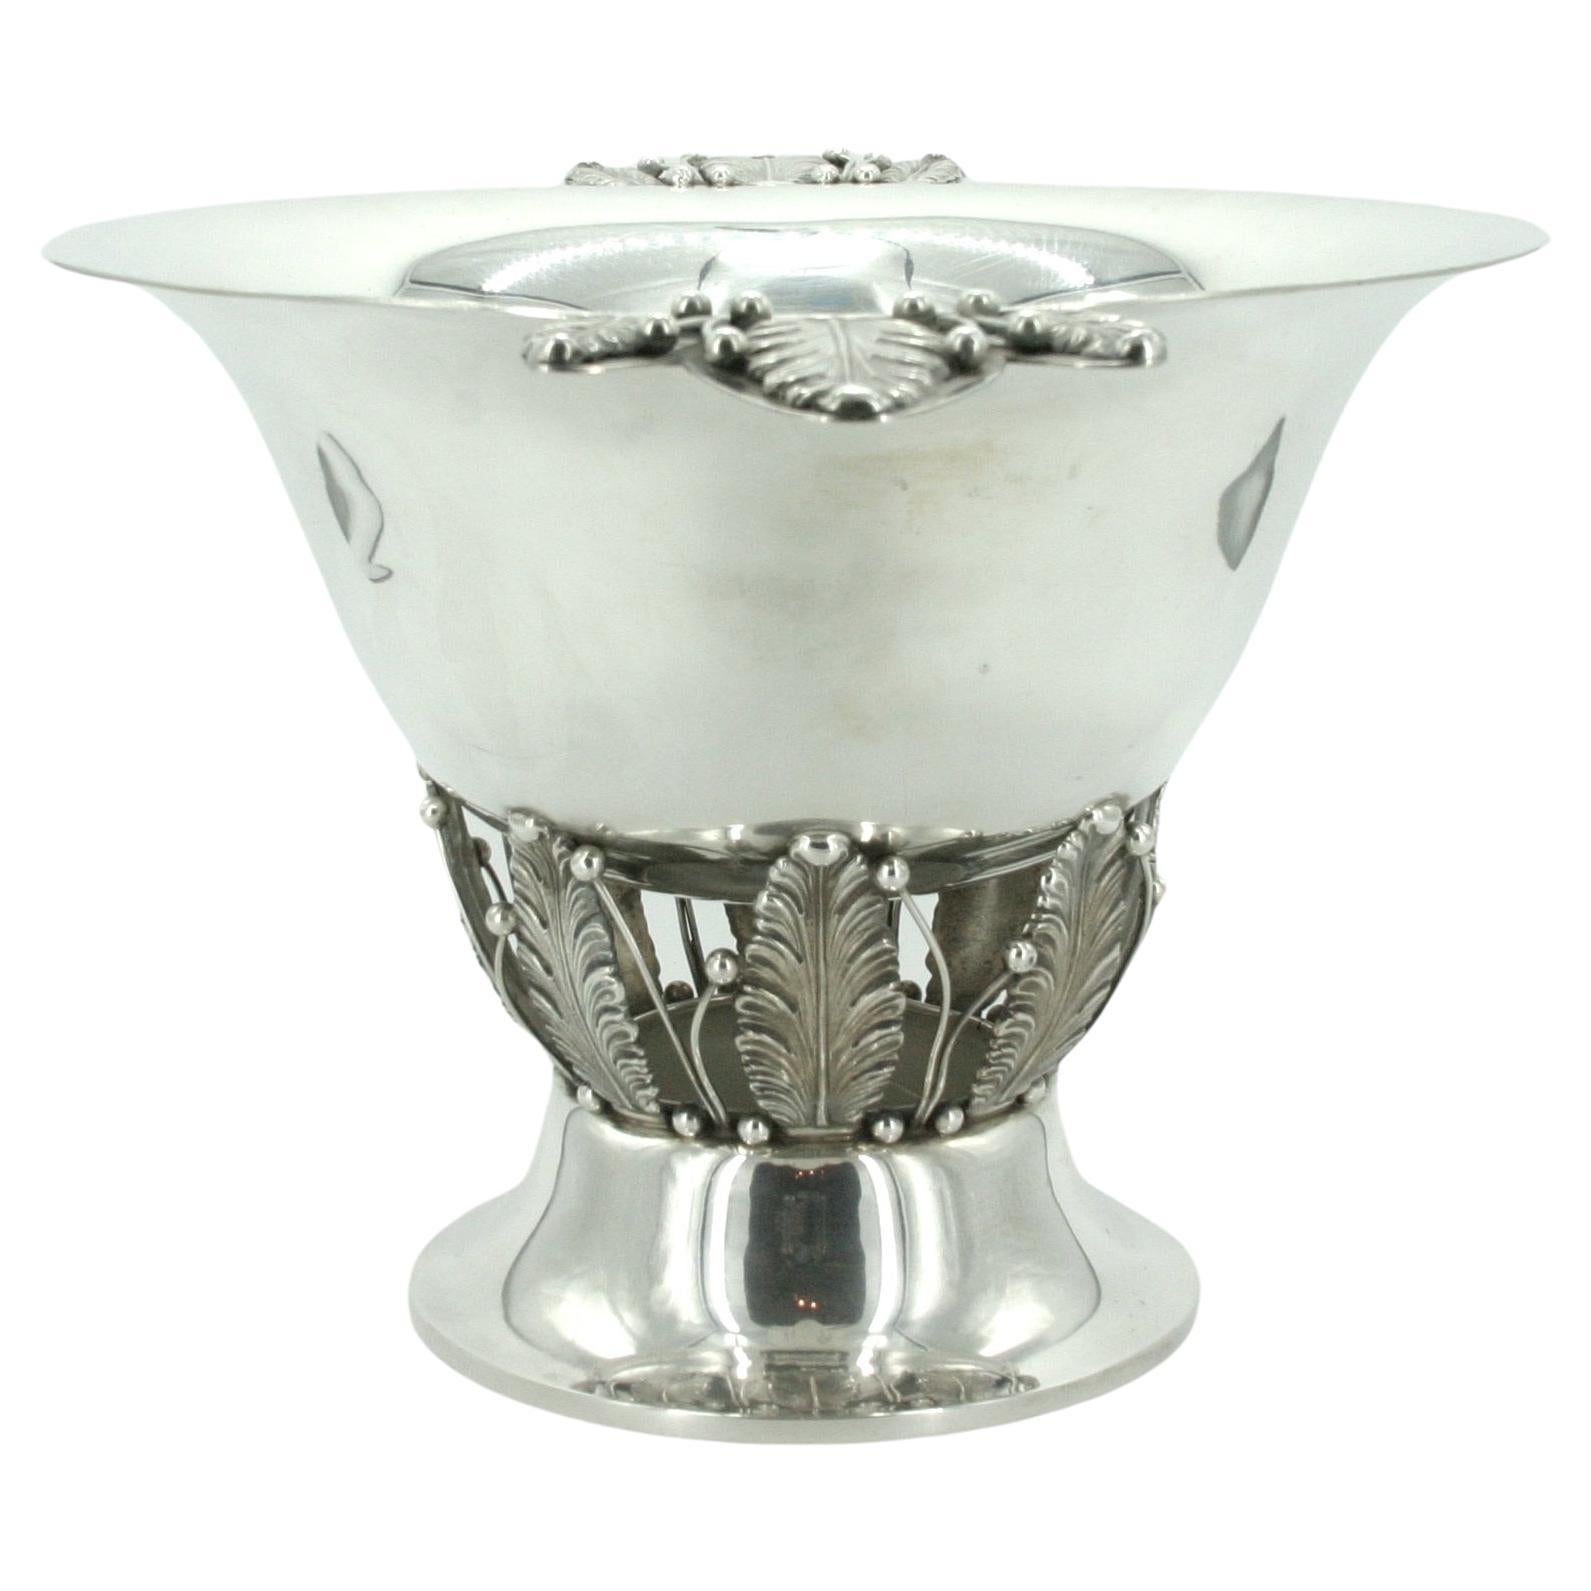 Very large sterling silver woodside sterling Co barware / tableware footed punch bowl or wine cooler. The punch bowl features two side handles resting on a proportions round base. The bowl is in great condition. Stamped with firm's mark and 